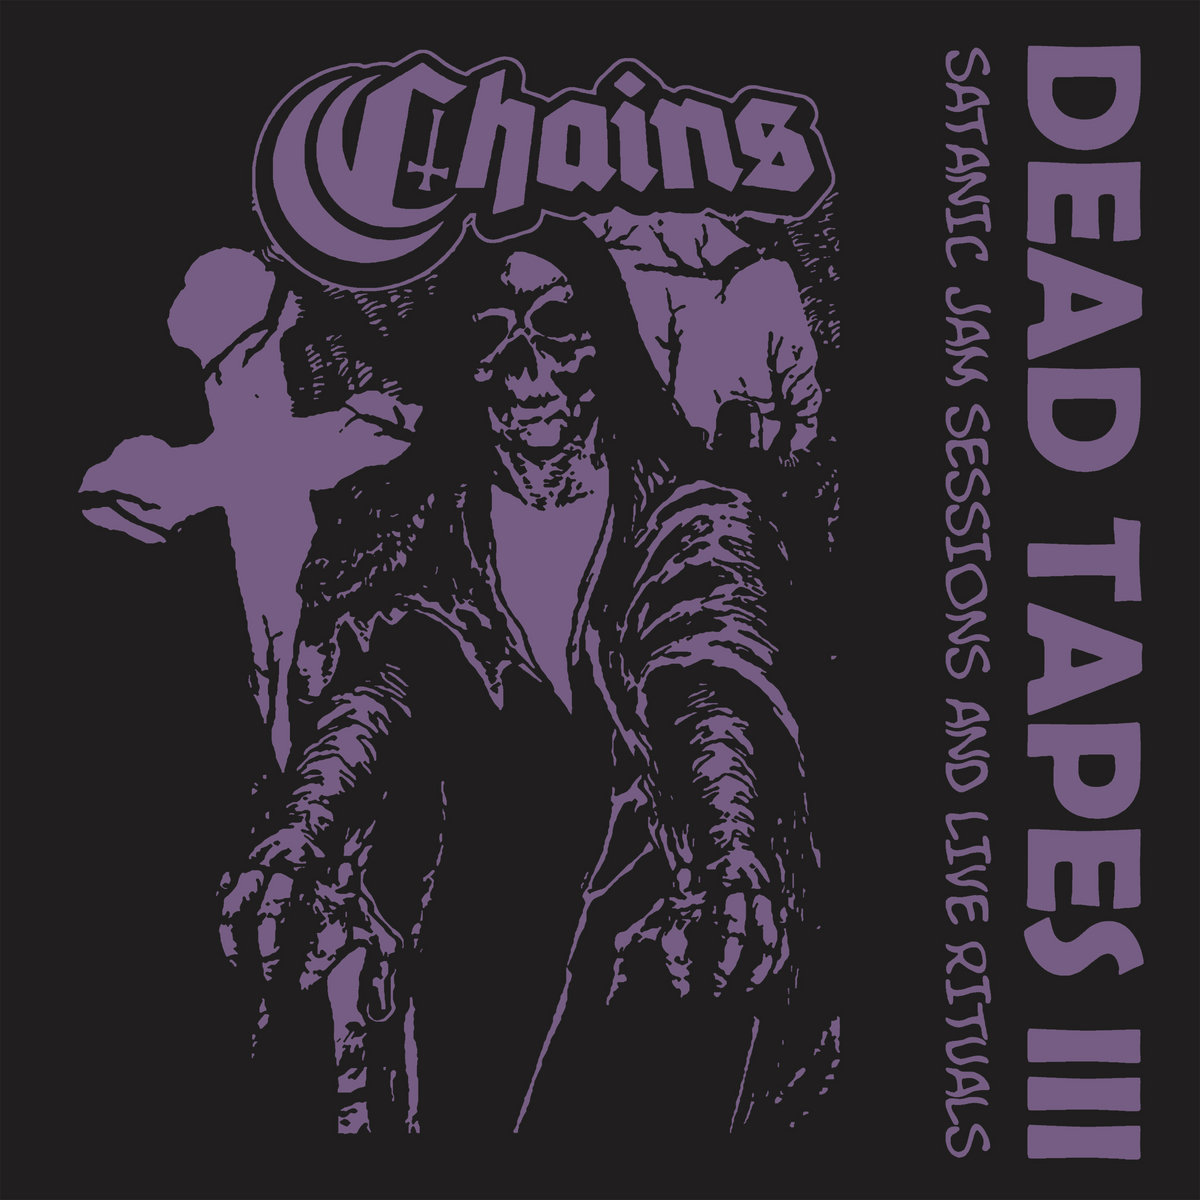 Chains - "Dead Tapes III - Satanic Jam Sessions and Live Rituals" Anthology - 2022